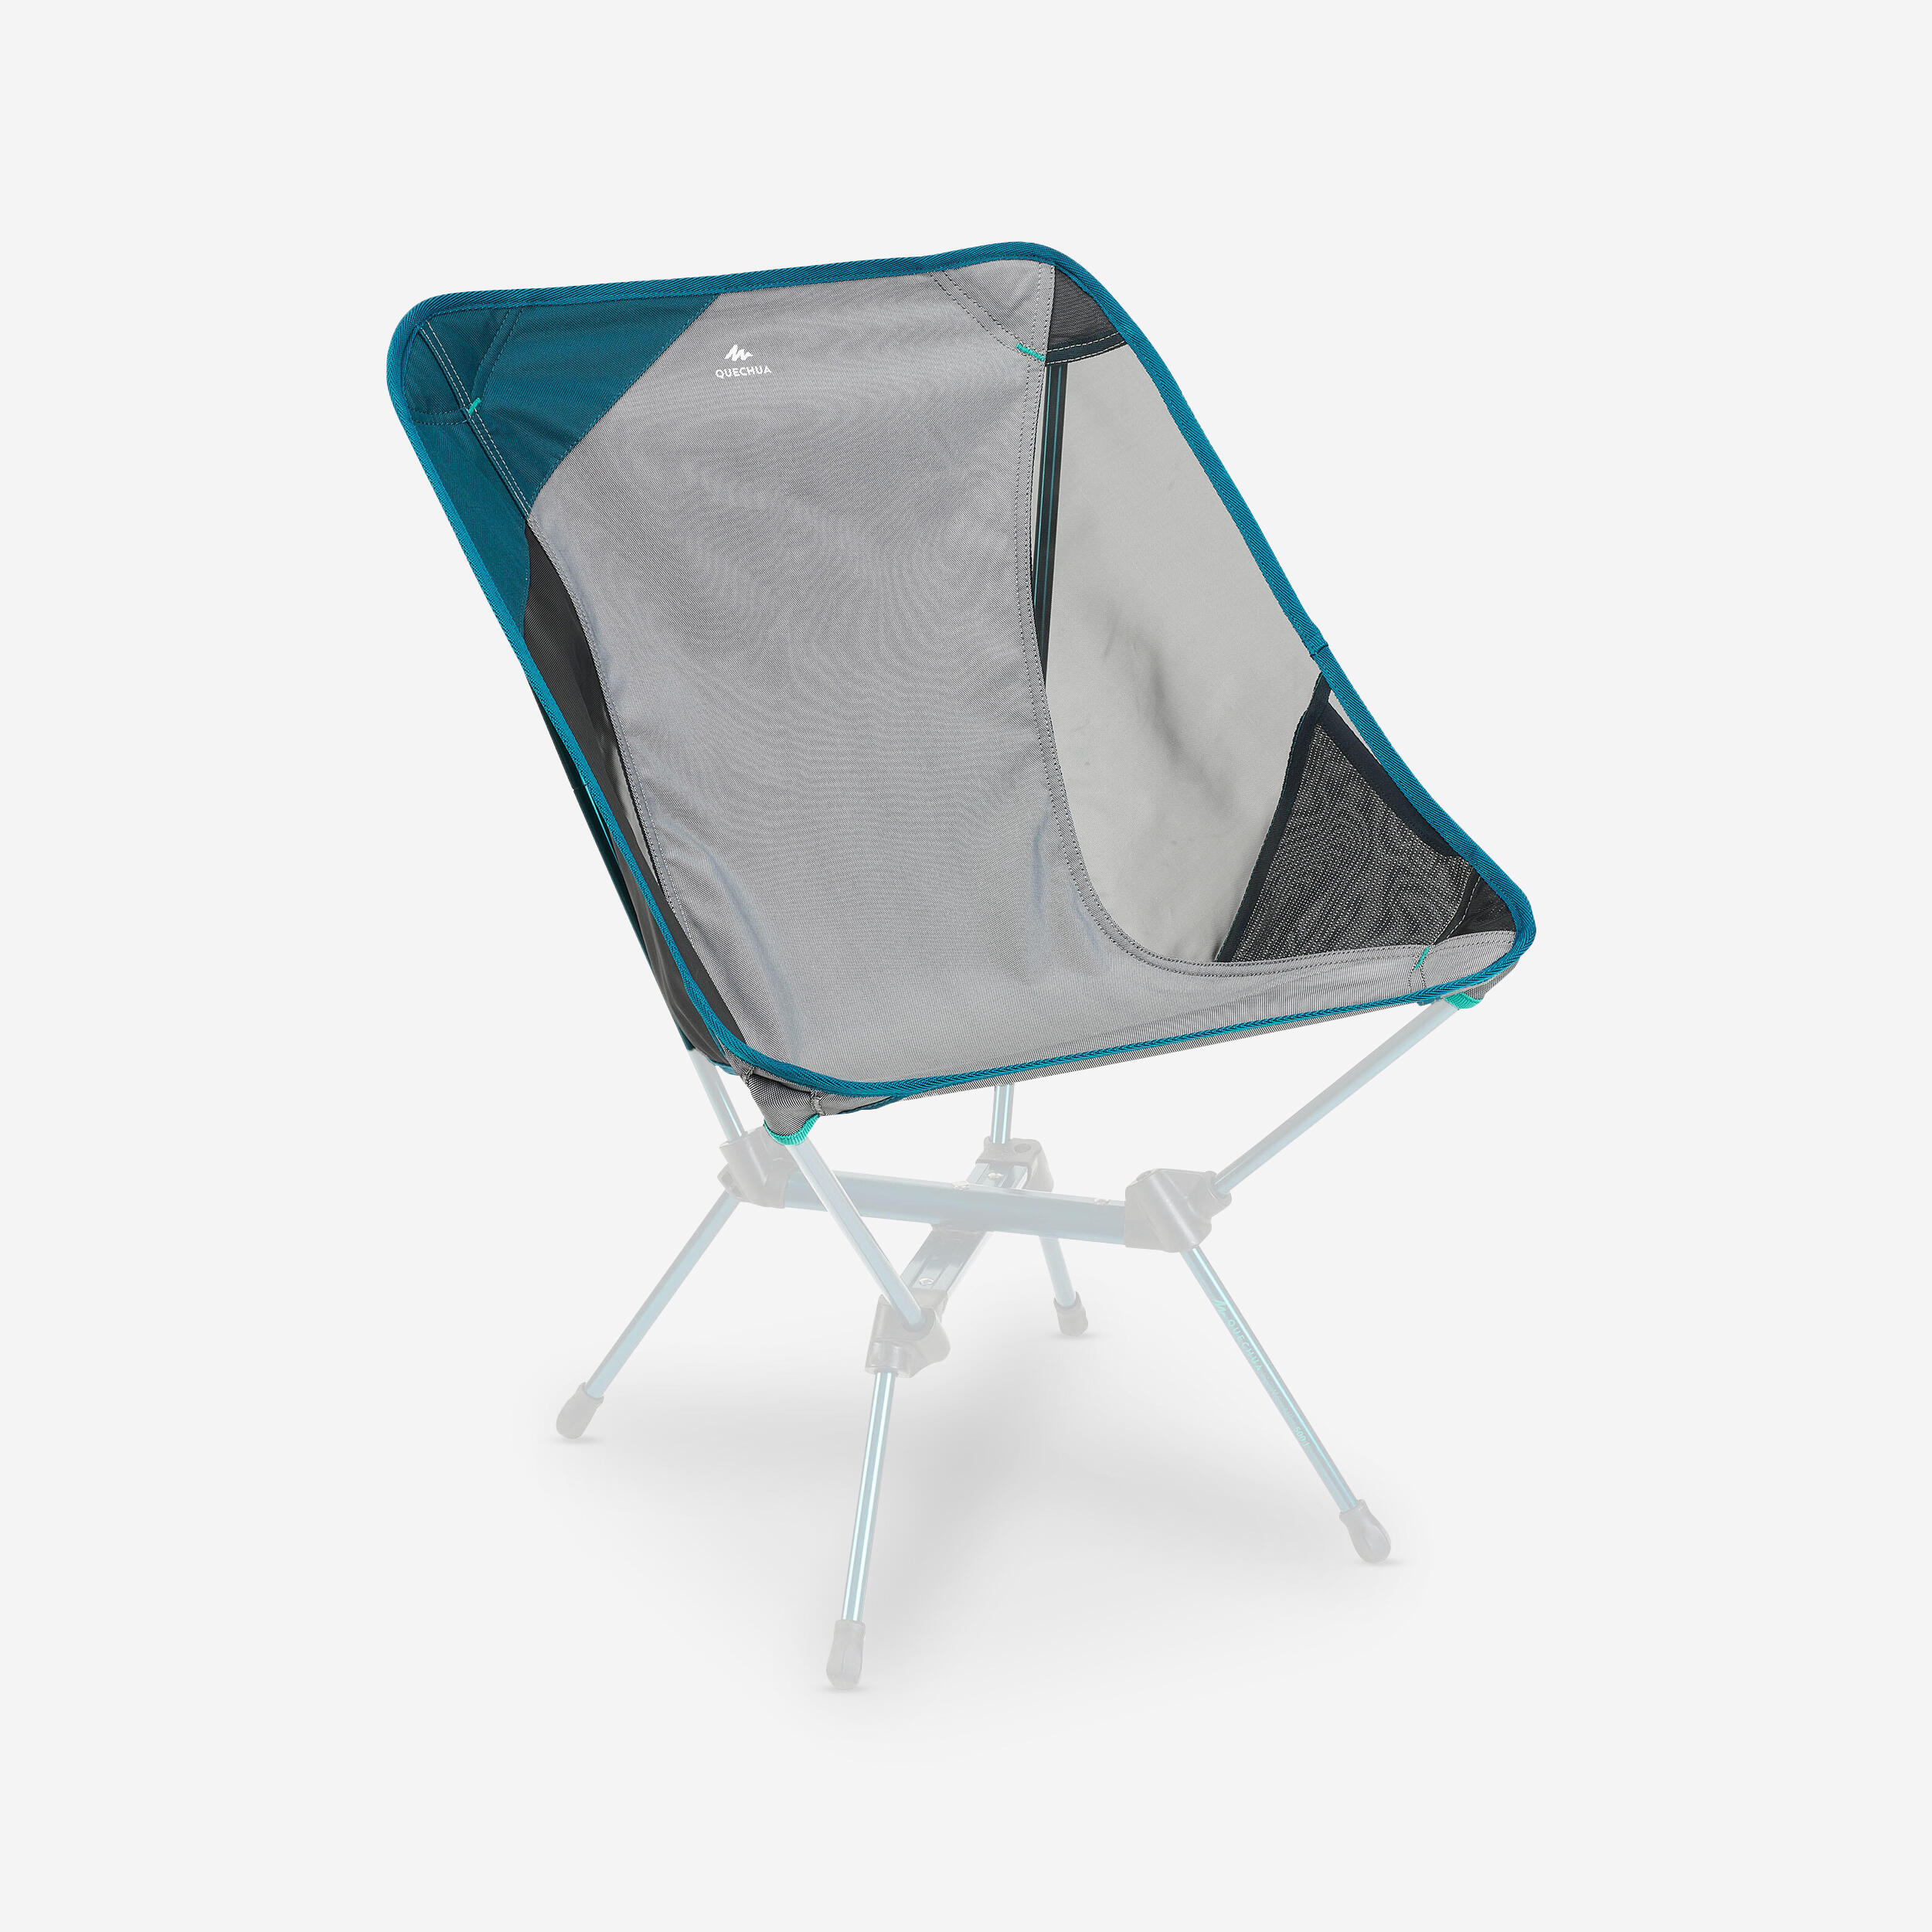 Folding low chair: instructions, repairs